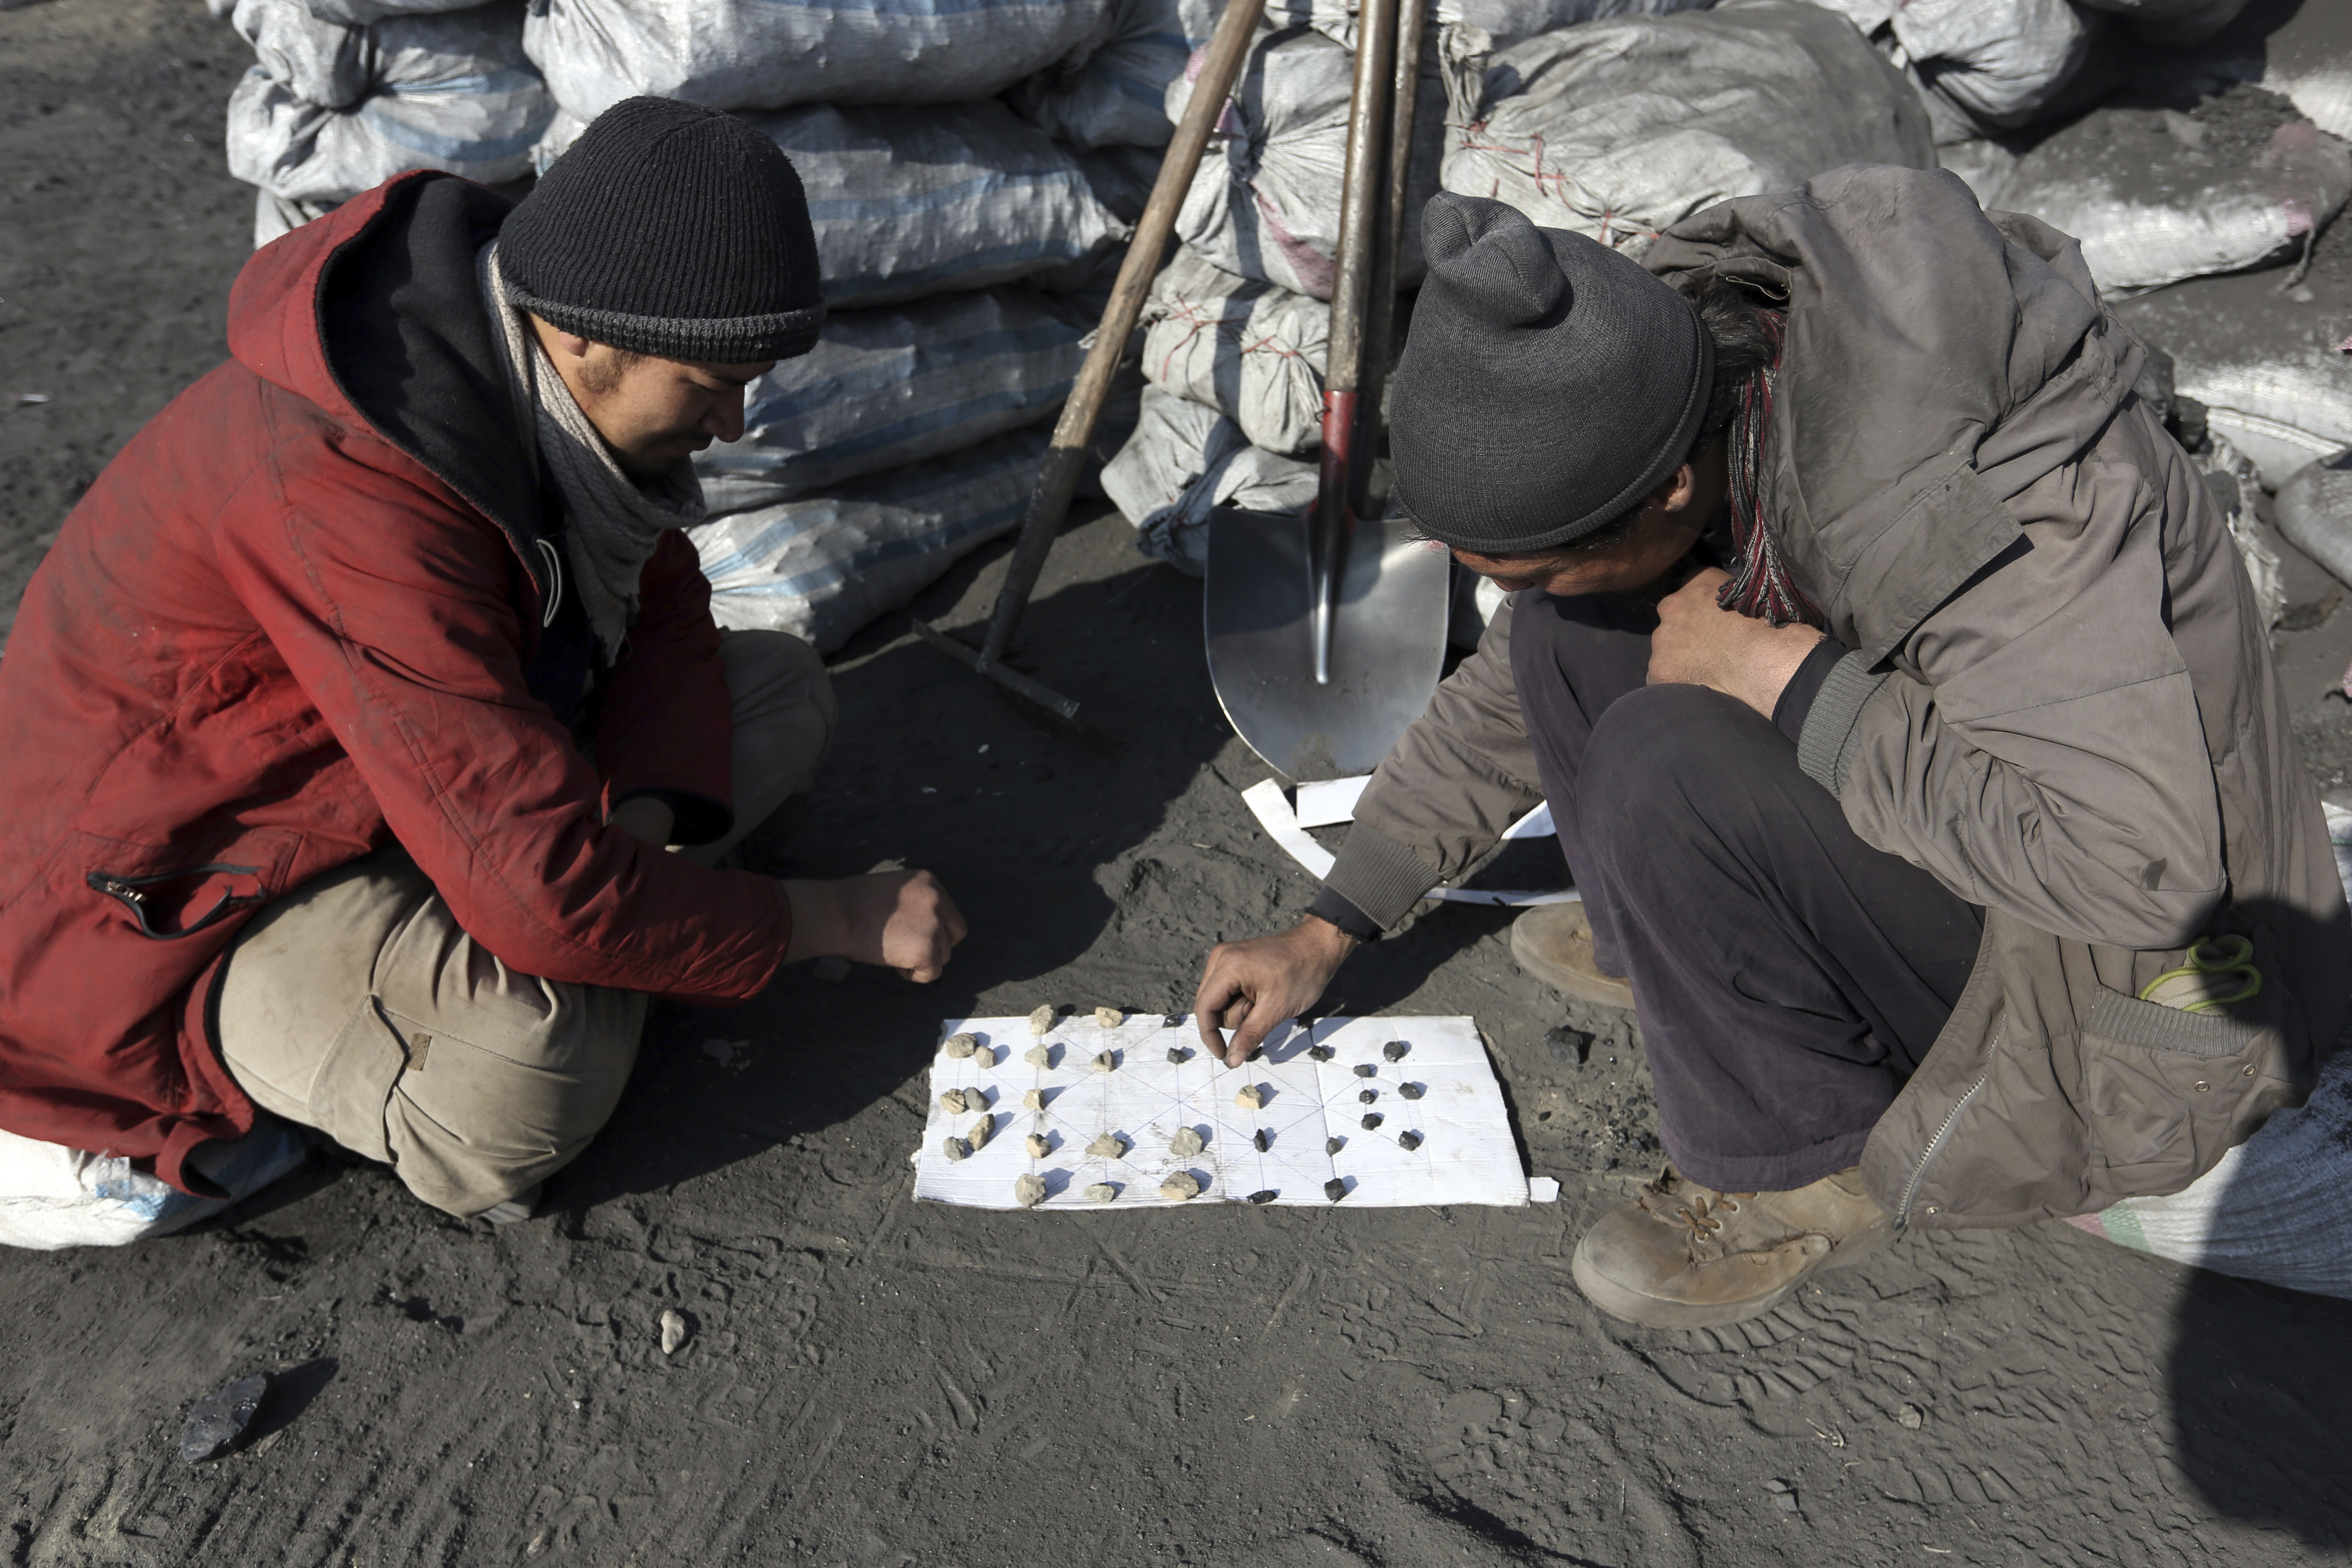 Afghan laborers play a game at a charcoal market in Dehsabz district of Kabul, Afghanistan Tuesday, Dec. 5, 2017. In winter, prices of wood and charcoal rise among all other necessities for Afghans. (AP Photo/Rahmat Gul)